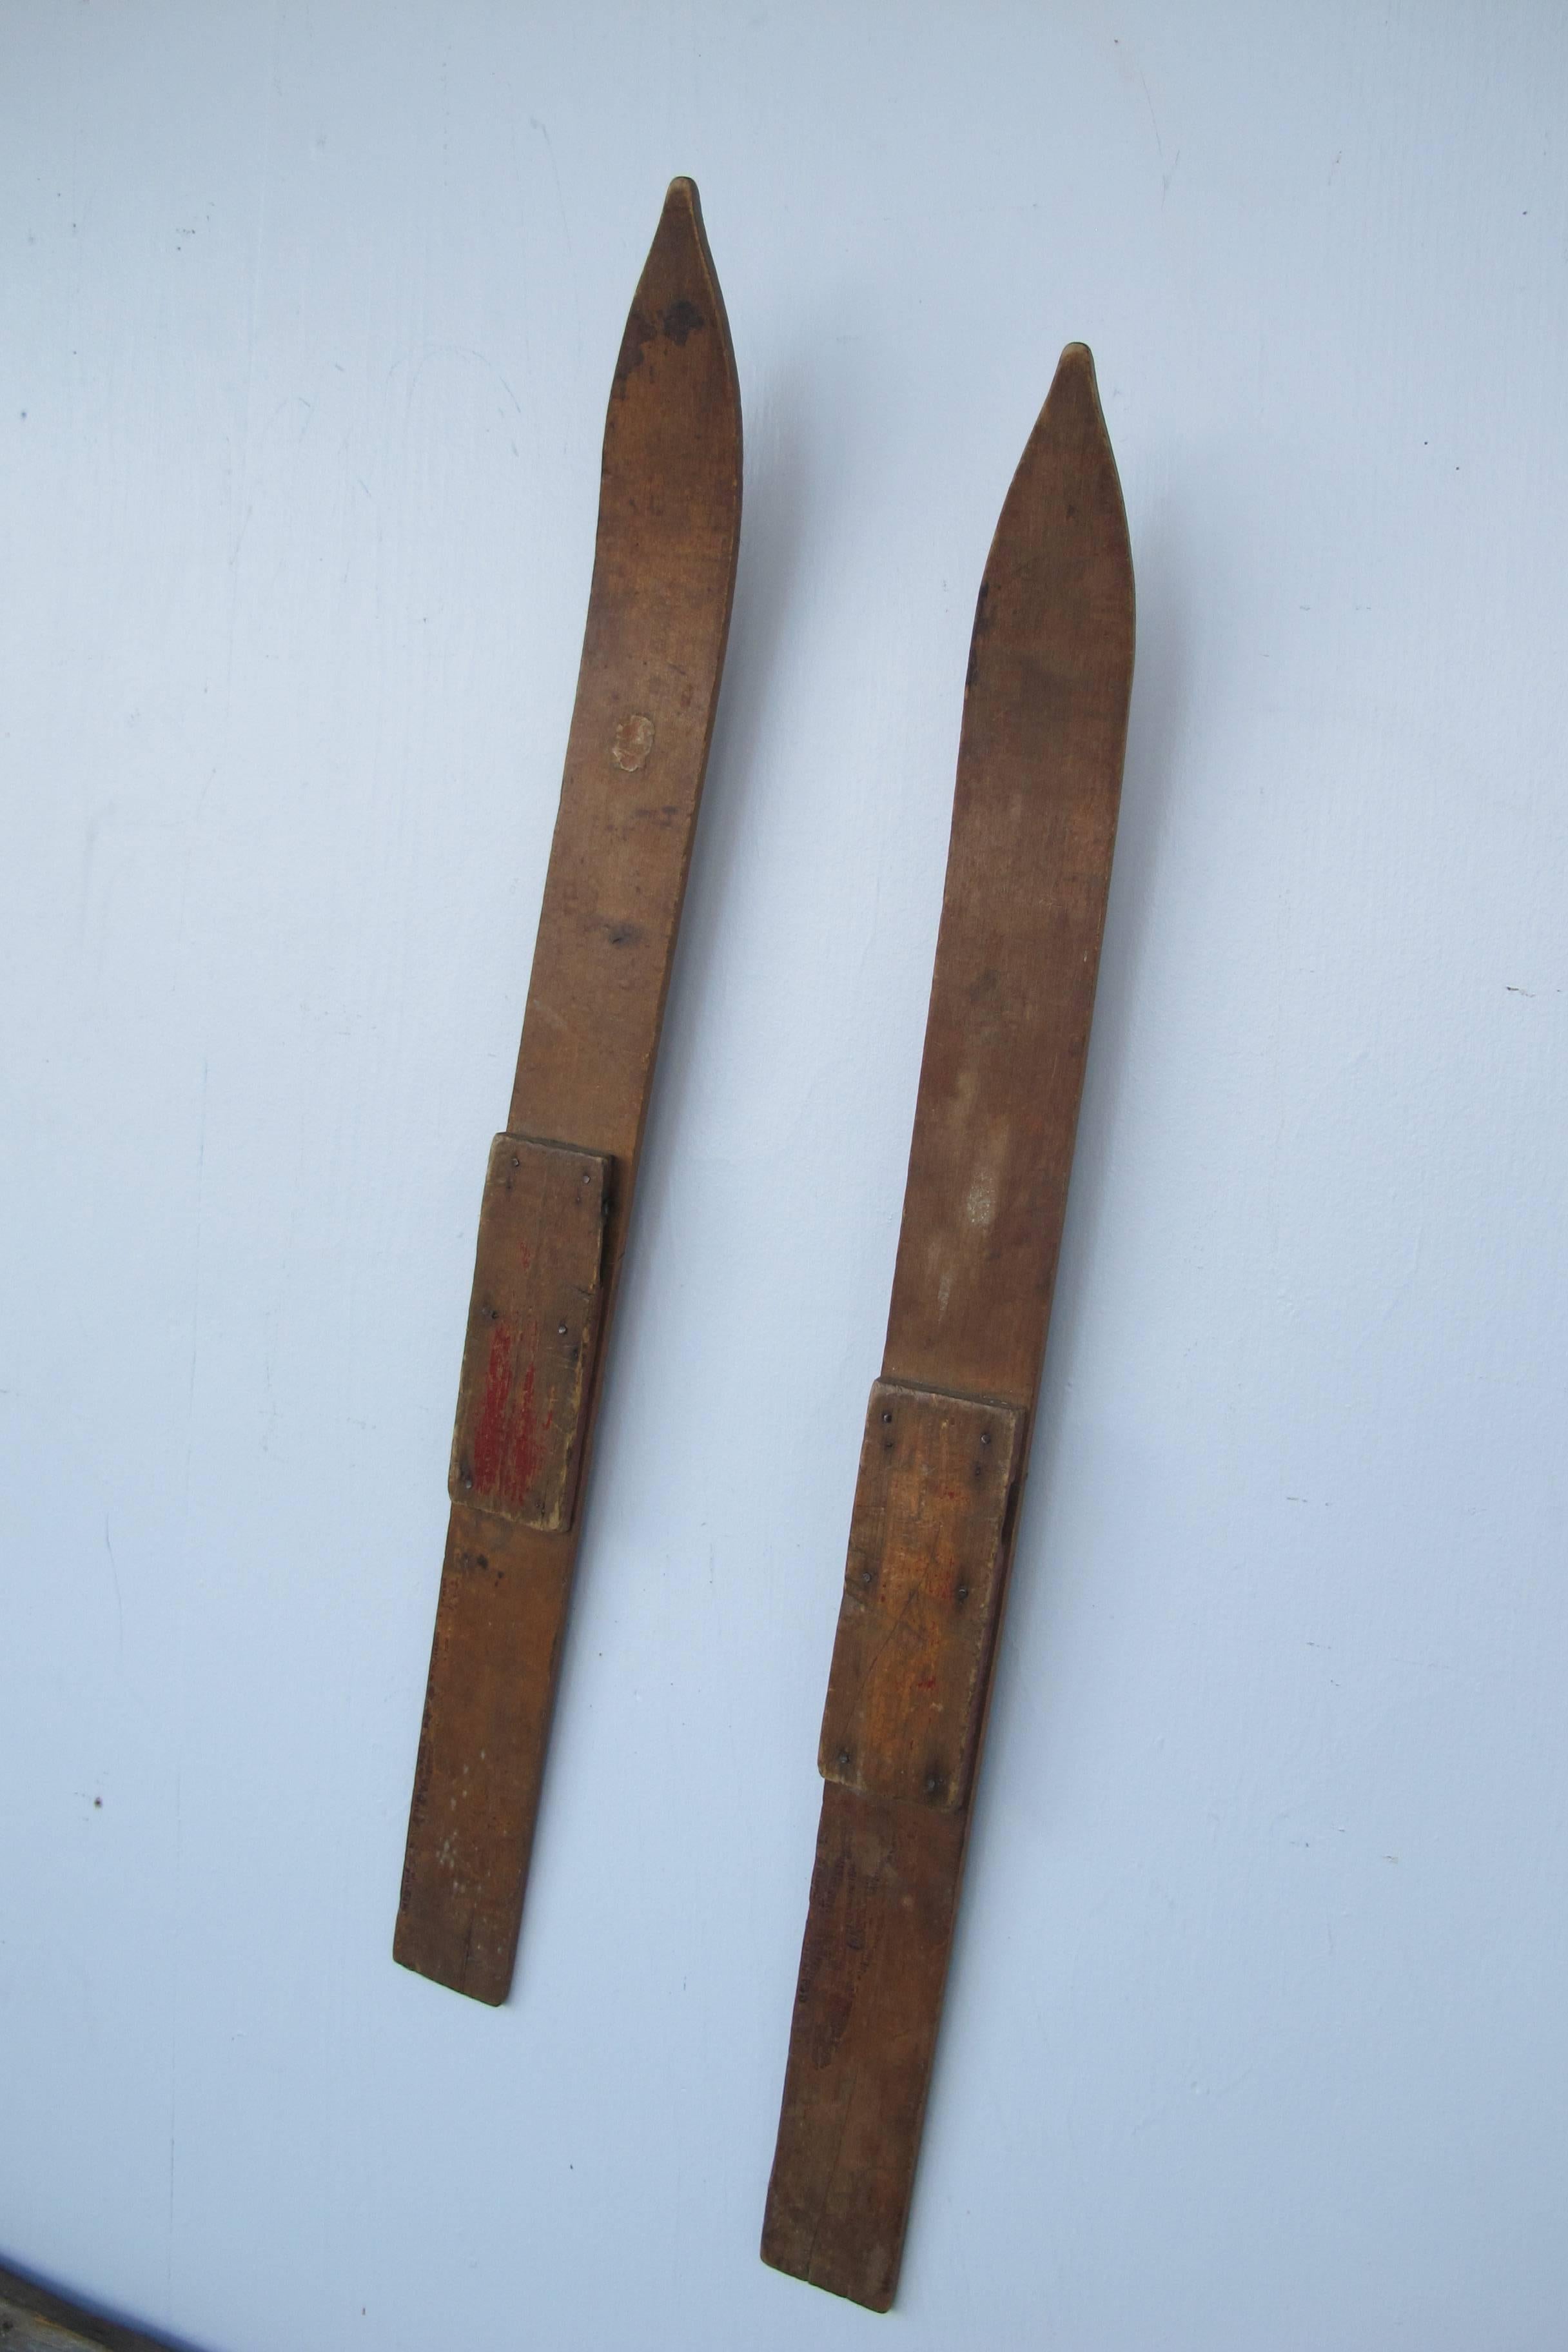 Diminutive wooden skis with remains of some reddish wash. They look great at an angle on the wall. The bentwood skis taper to a raised point and have a center groove on the bottoms. A rectangular strip of wood is nailed on where the boot would be